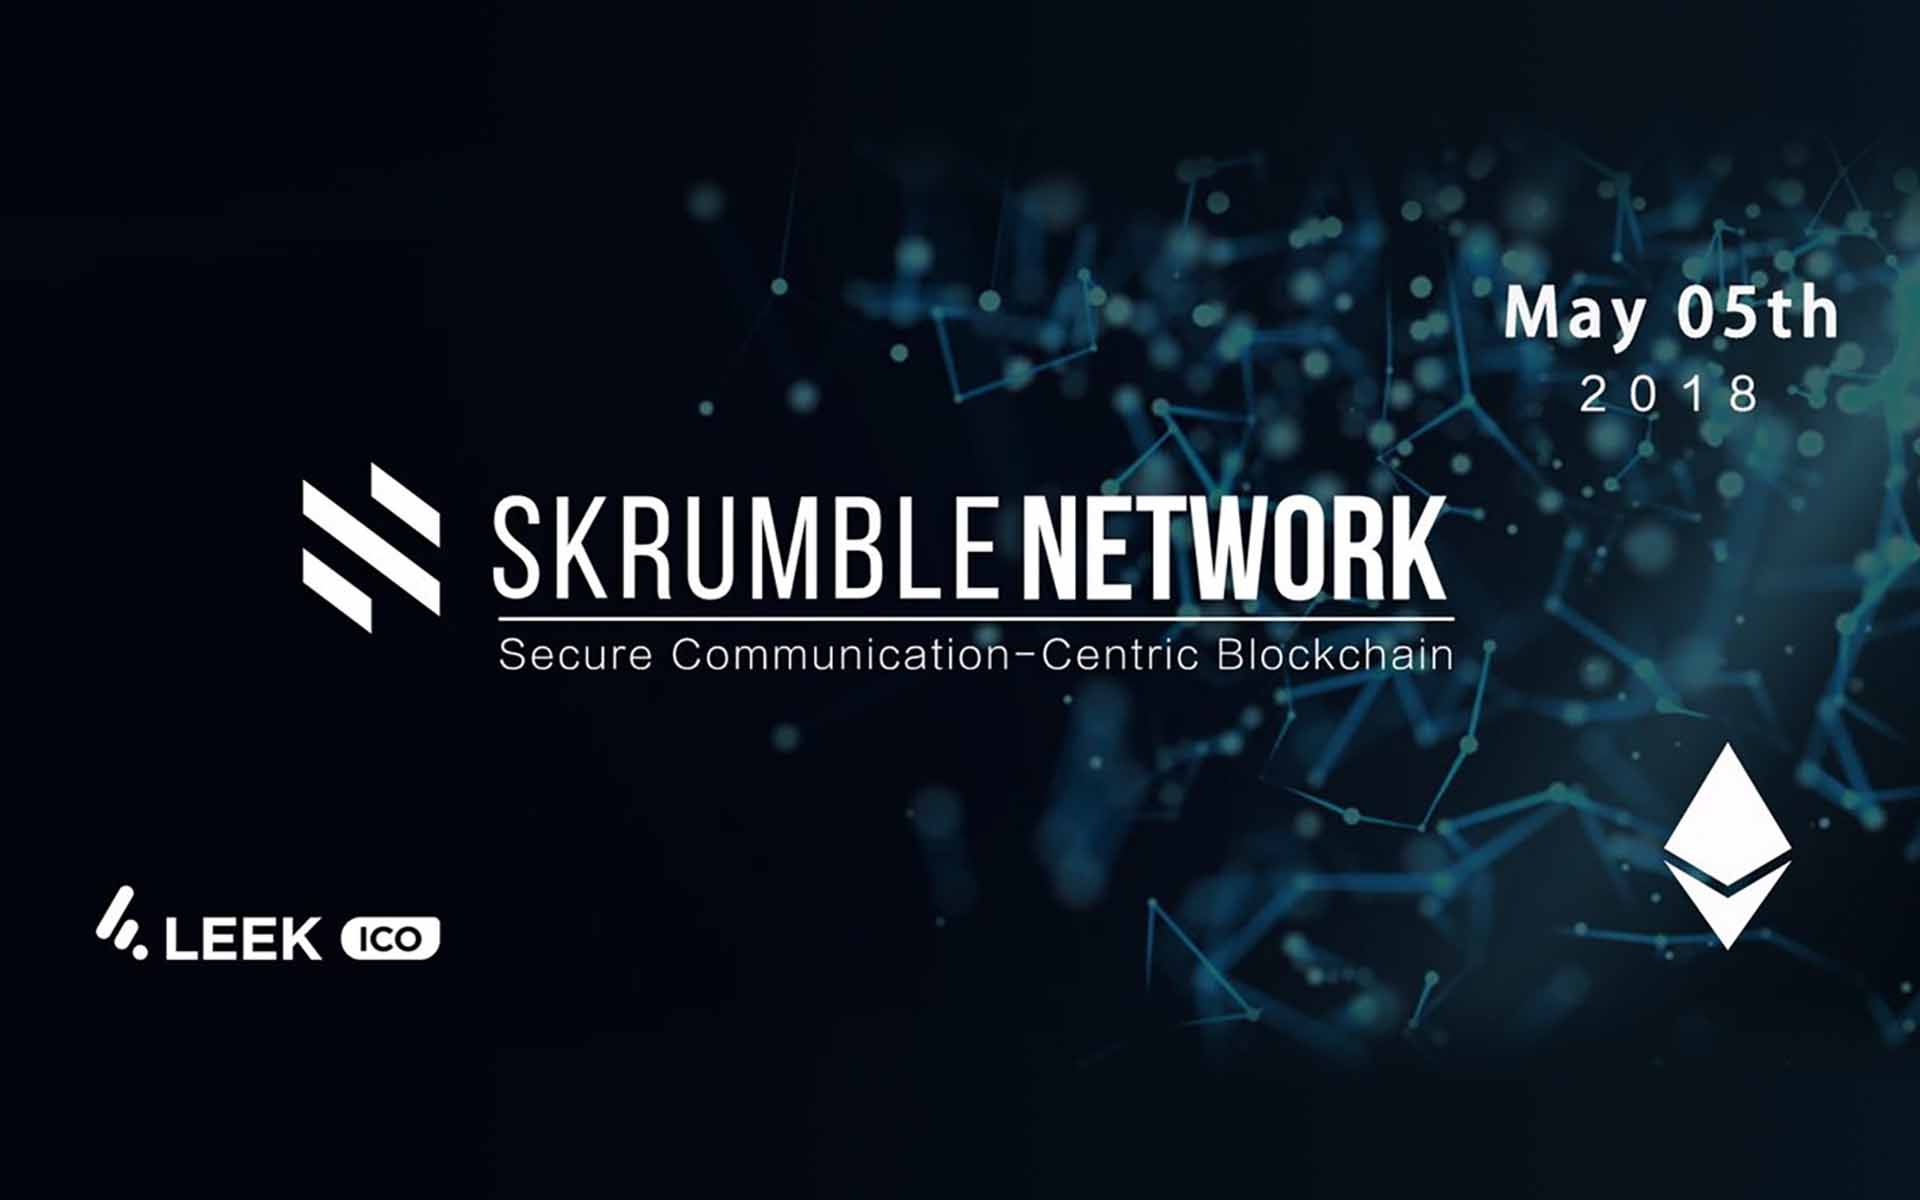 Skrumble Network Crowdfunding Sells Out in 1 Hour With the Help of LEEKICO and Announces First Exchange Listing